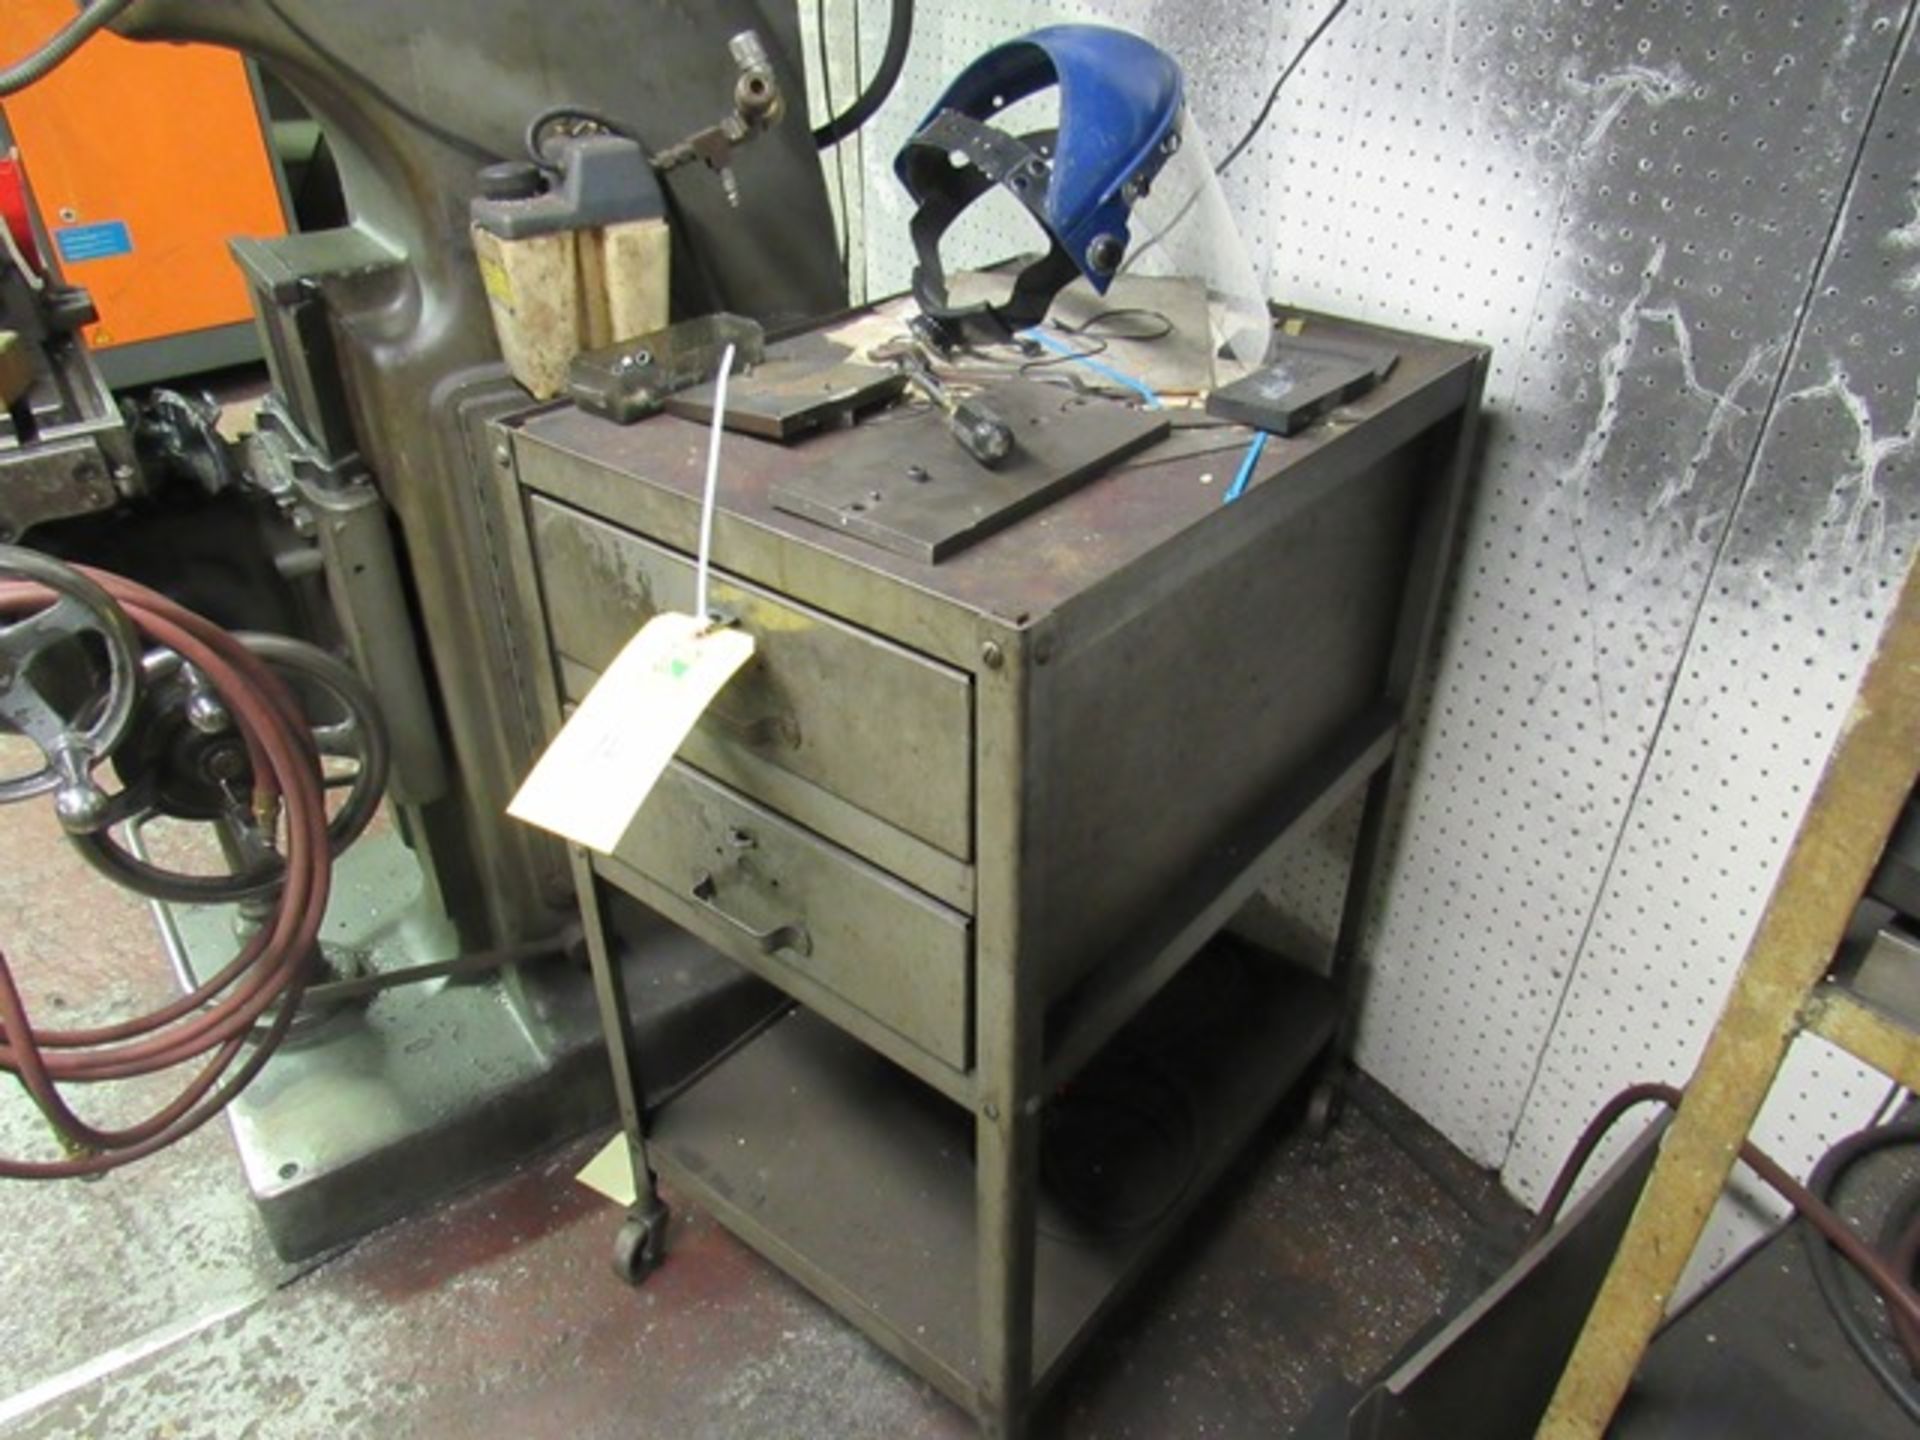 Smaller Wheeled Cabinet, Rigging Fee: $50 - Image 2 of 2